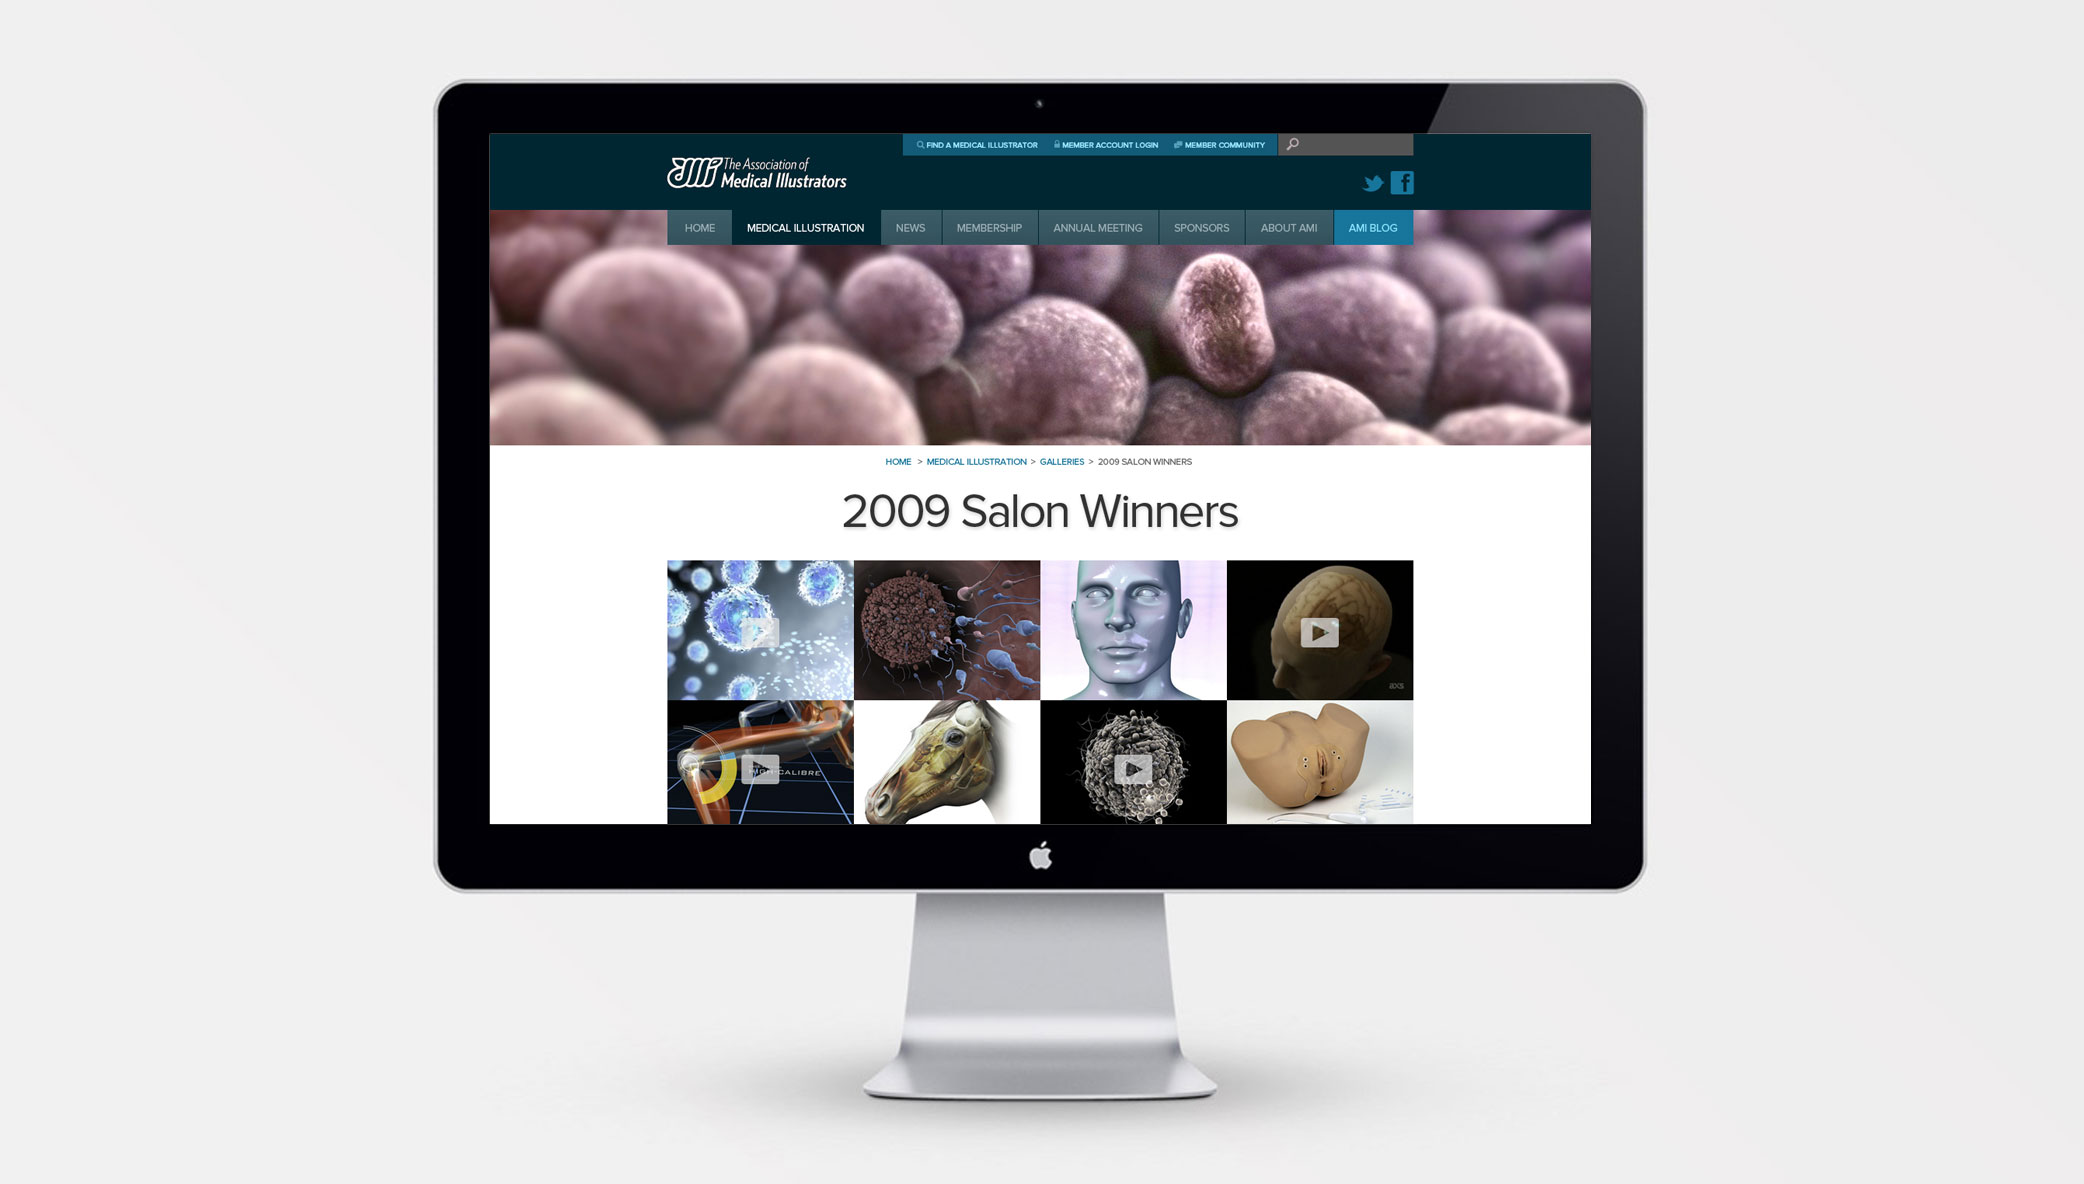 Stone Designed Website, AMI.org, Chosen As Adobe Site of the Day